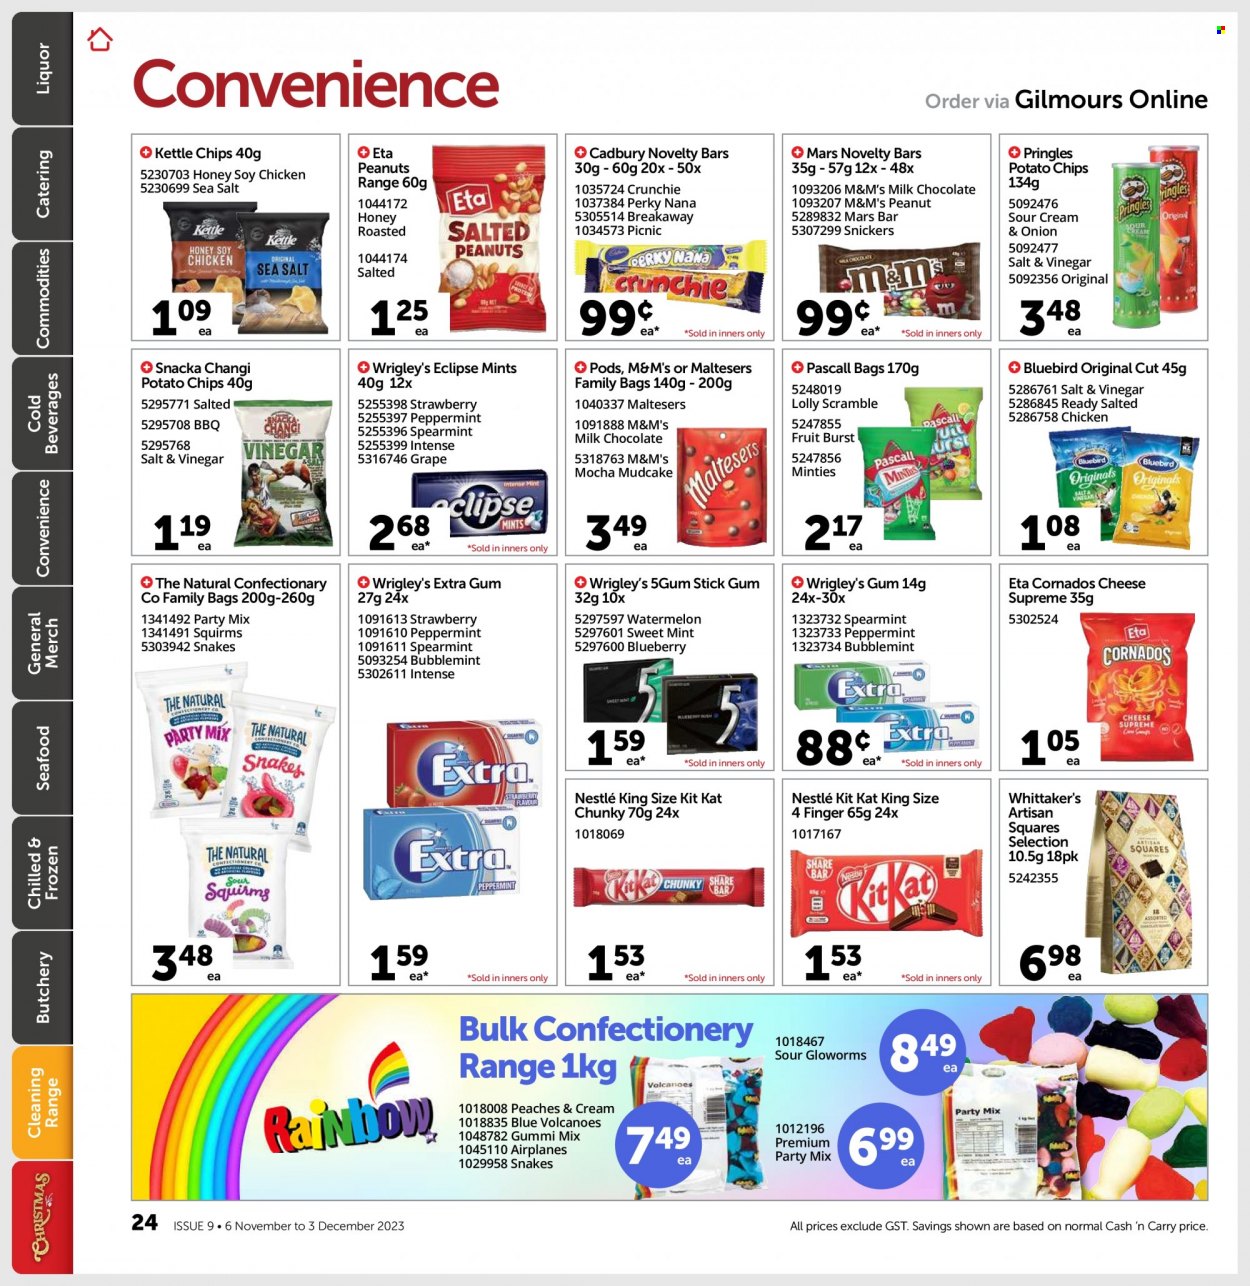 thumbnail - Gilmours mailer - 06.11.2023 - 03.12.2023 - Sales products - guava, pineapple, peaches, seafood, flavoured milk, milk chocolate, Nestlé, chocolate, Snickers, Mars, KitKat, M&M's, chewing gum, lollipop, Maltesers, Cadbury, Whittaker's, Artisan Squares Selection, chocolate candies, Wrigley's, sweets, bars, potato chips, Pringles, Bluebird, Kettle chips, salty snack, mint, honey, peanuts, apple juice, Coca-Cola, lemonade, Mountain Dew, Sprite, Pepsi, juice, energy drink, Lipton, Fanta, ice tea, Pepsi Max, soft drink, Coca-Cola zero, 7UP, L&P, fruit punch, Coke, soda, carbonated soft drink, Bundaberg, alcohol, liqueur, liquor, beer, chicken, ginger beer. Page 23.